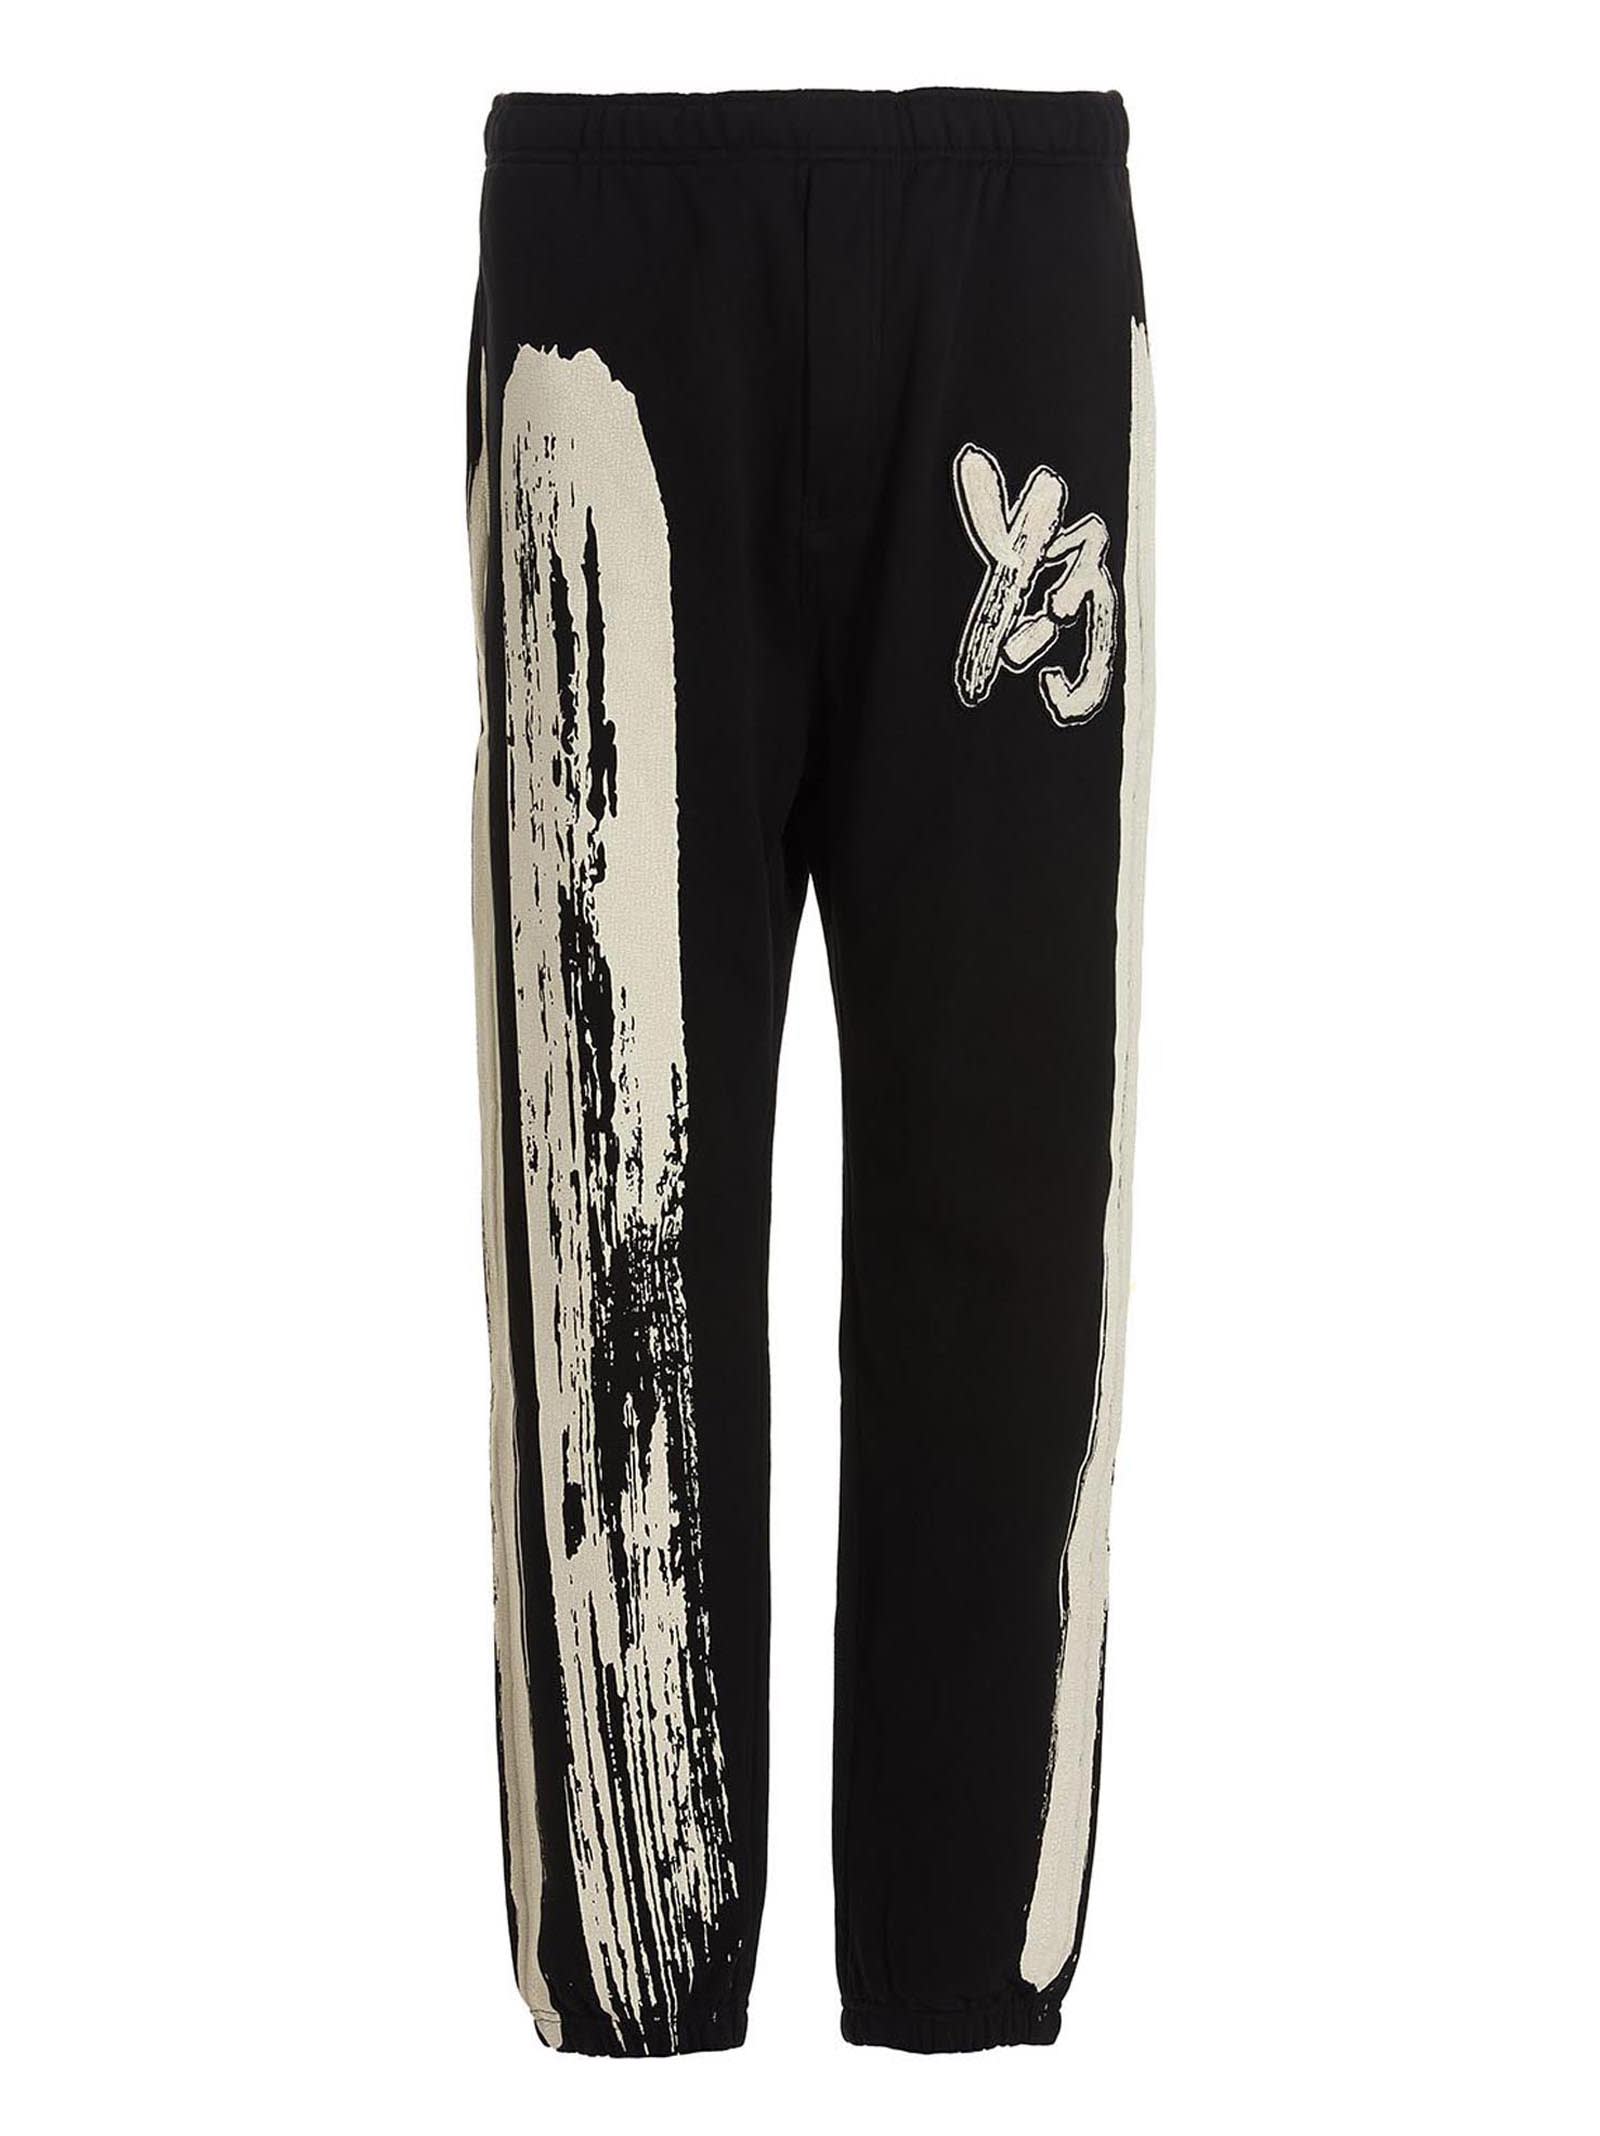 Y-3 logo Ft Joggers